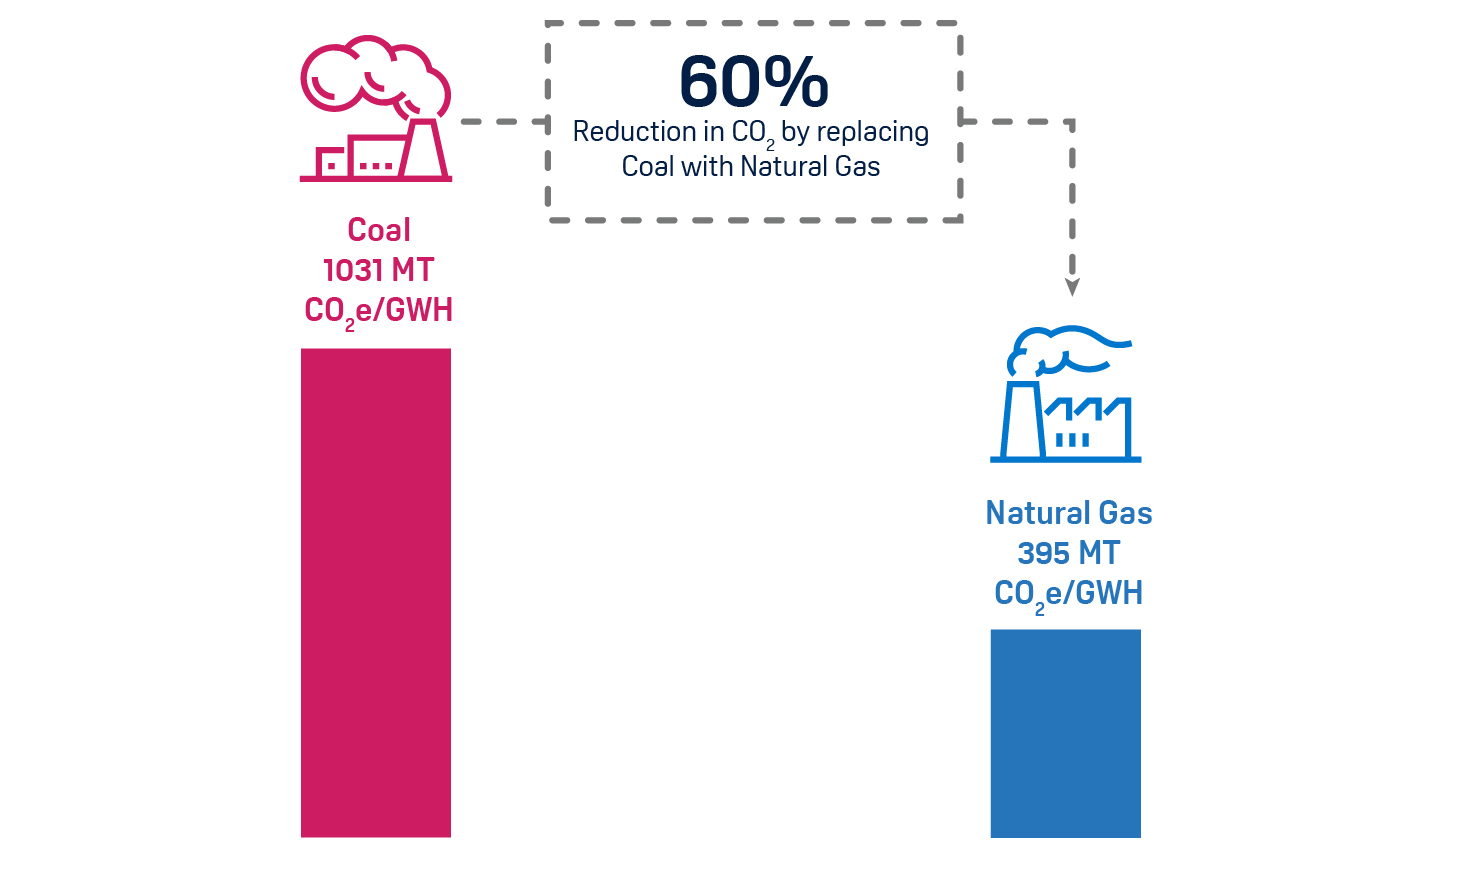 Bar chart comparing Co2 emissions of coal to natural gas.  Coal: 1,031 metric tons of CO2e per gigawatt hour. Natural Gas 395 metric tons of CO2e per gigawatt hour. Shows a 60% reduction in CO2 by replacing coal with natural gas.